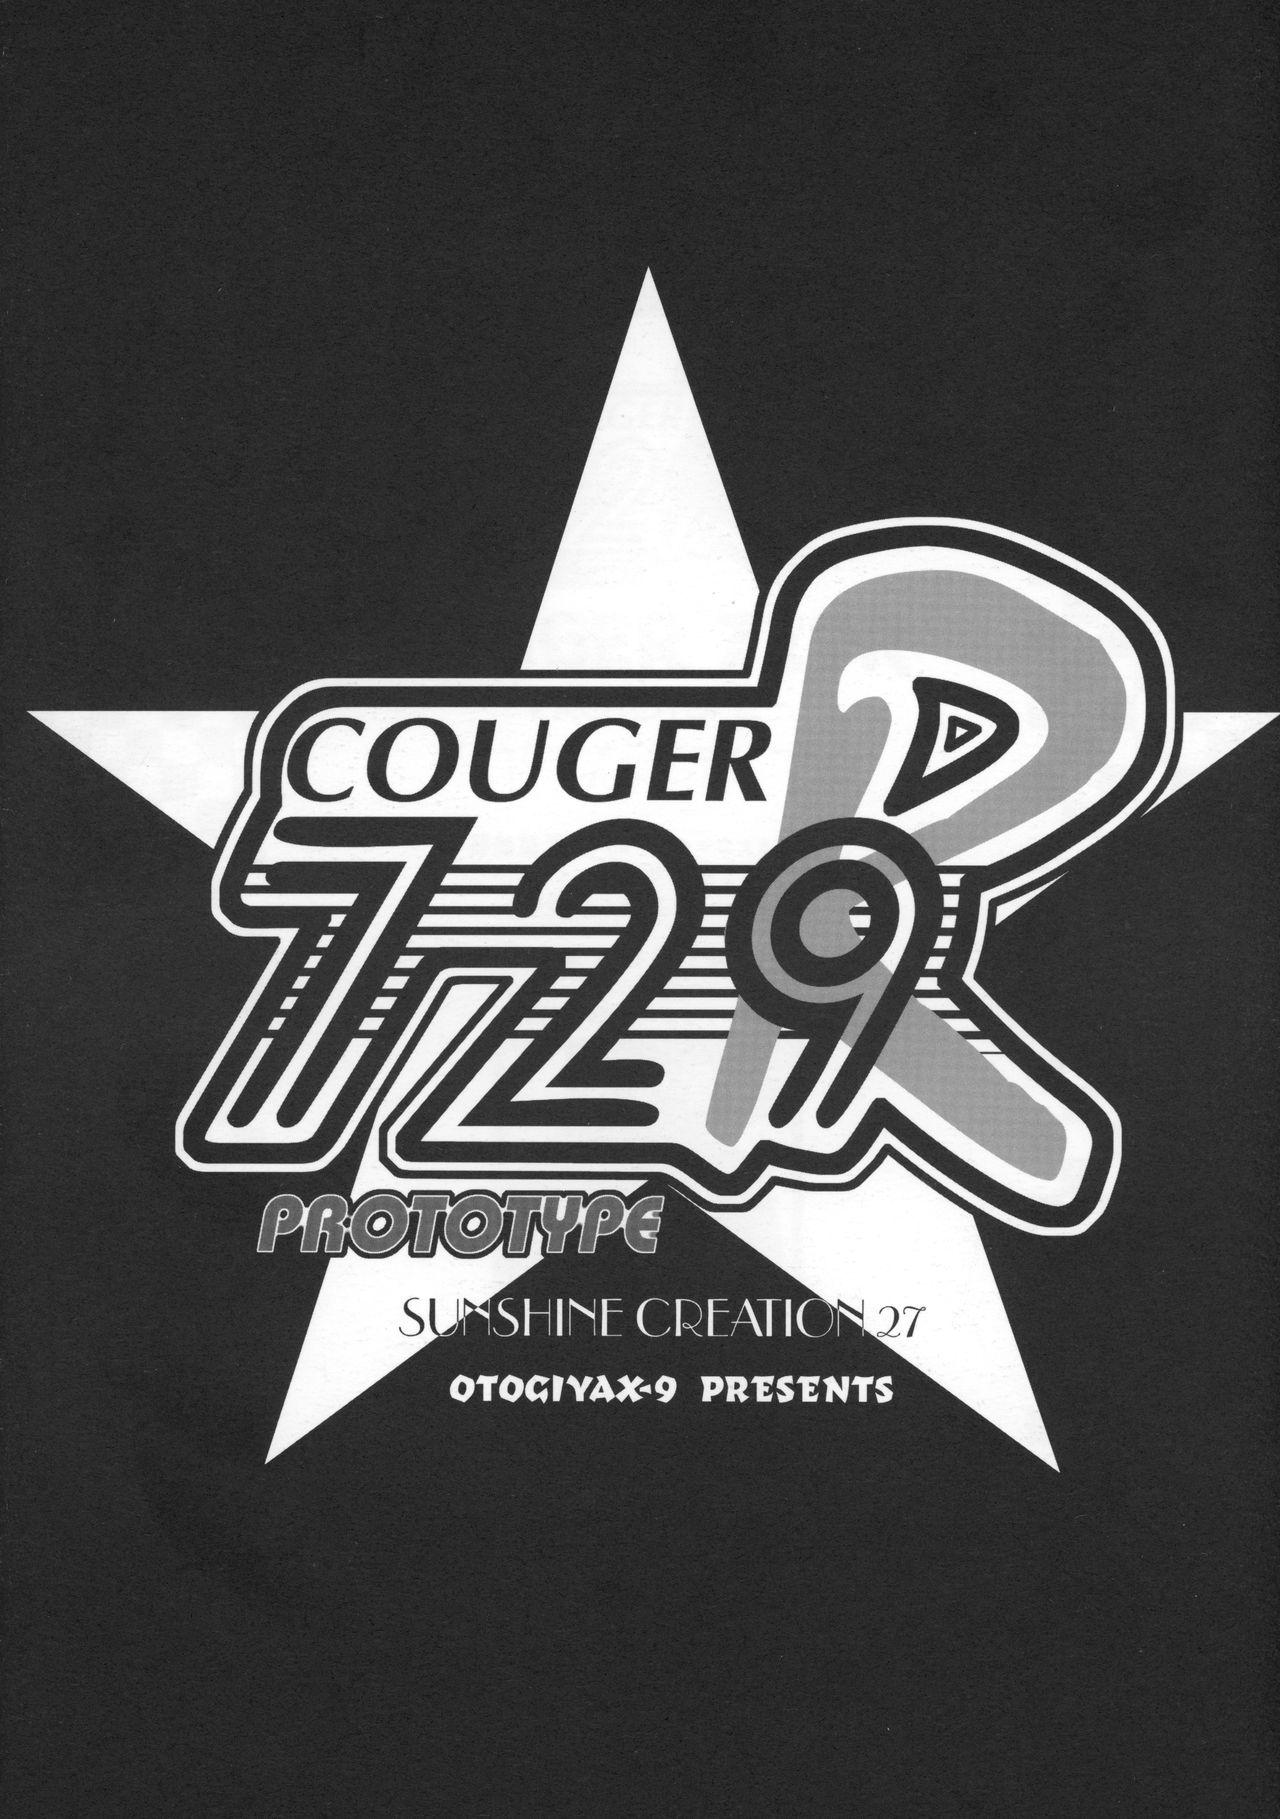 COUGER 729R PROTOTYPE 21